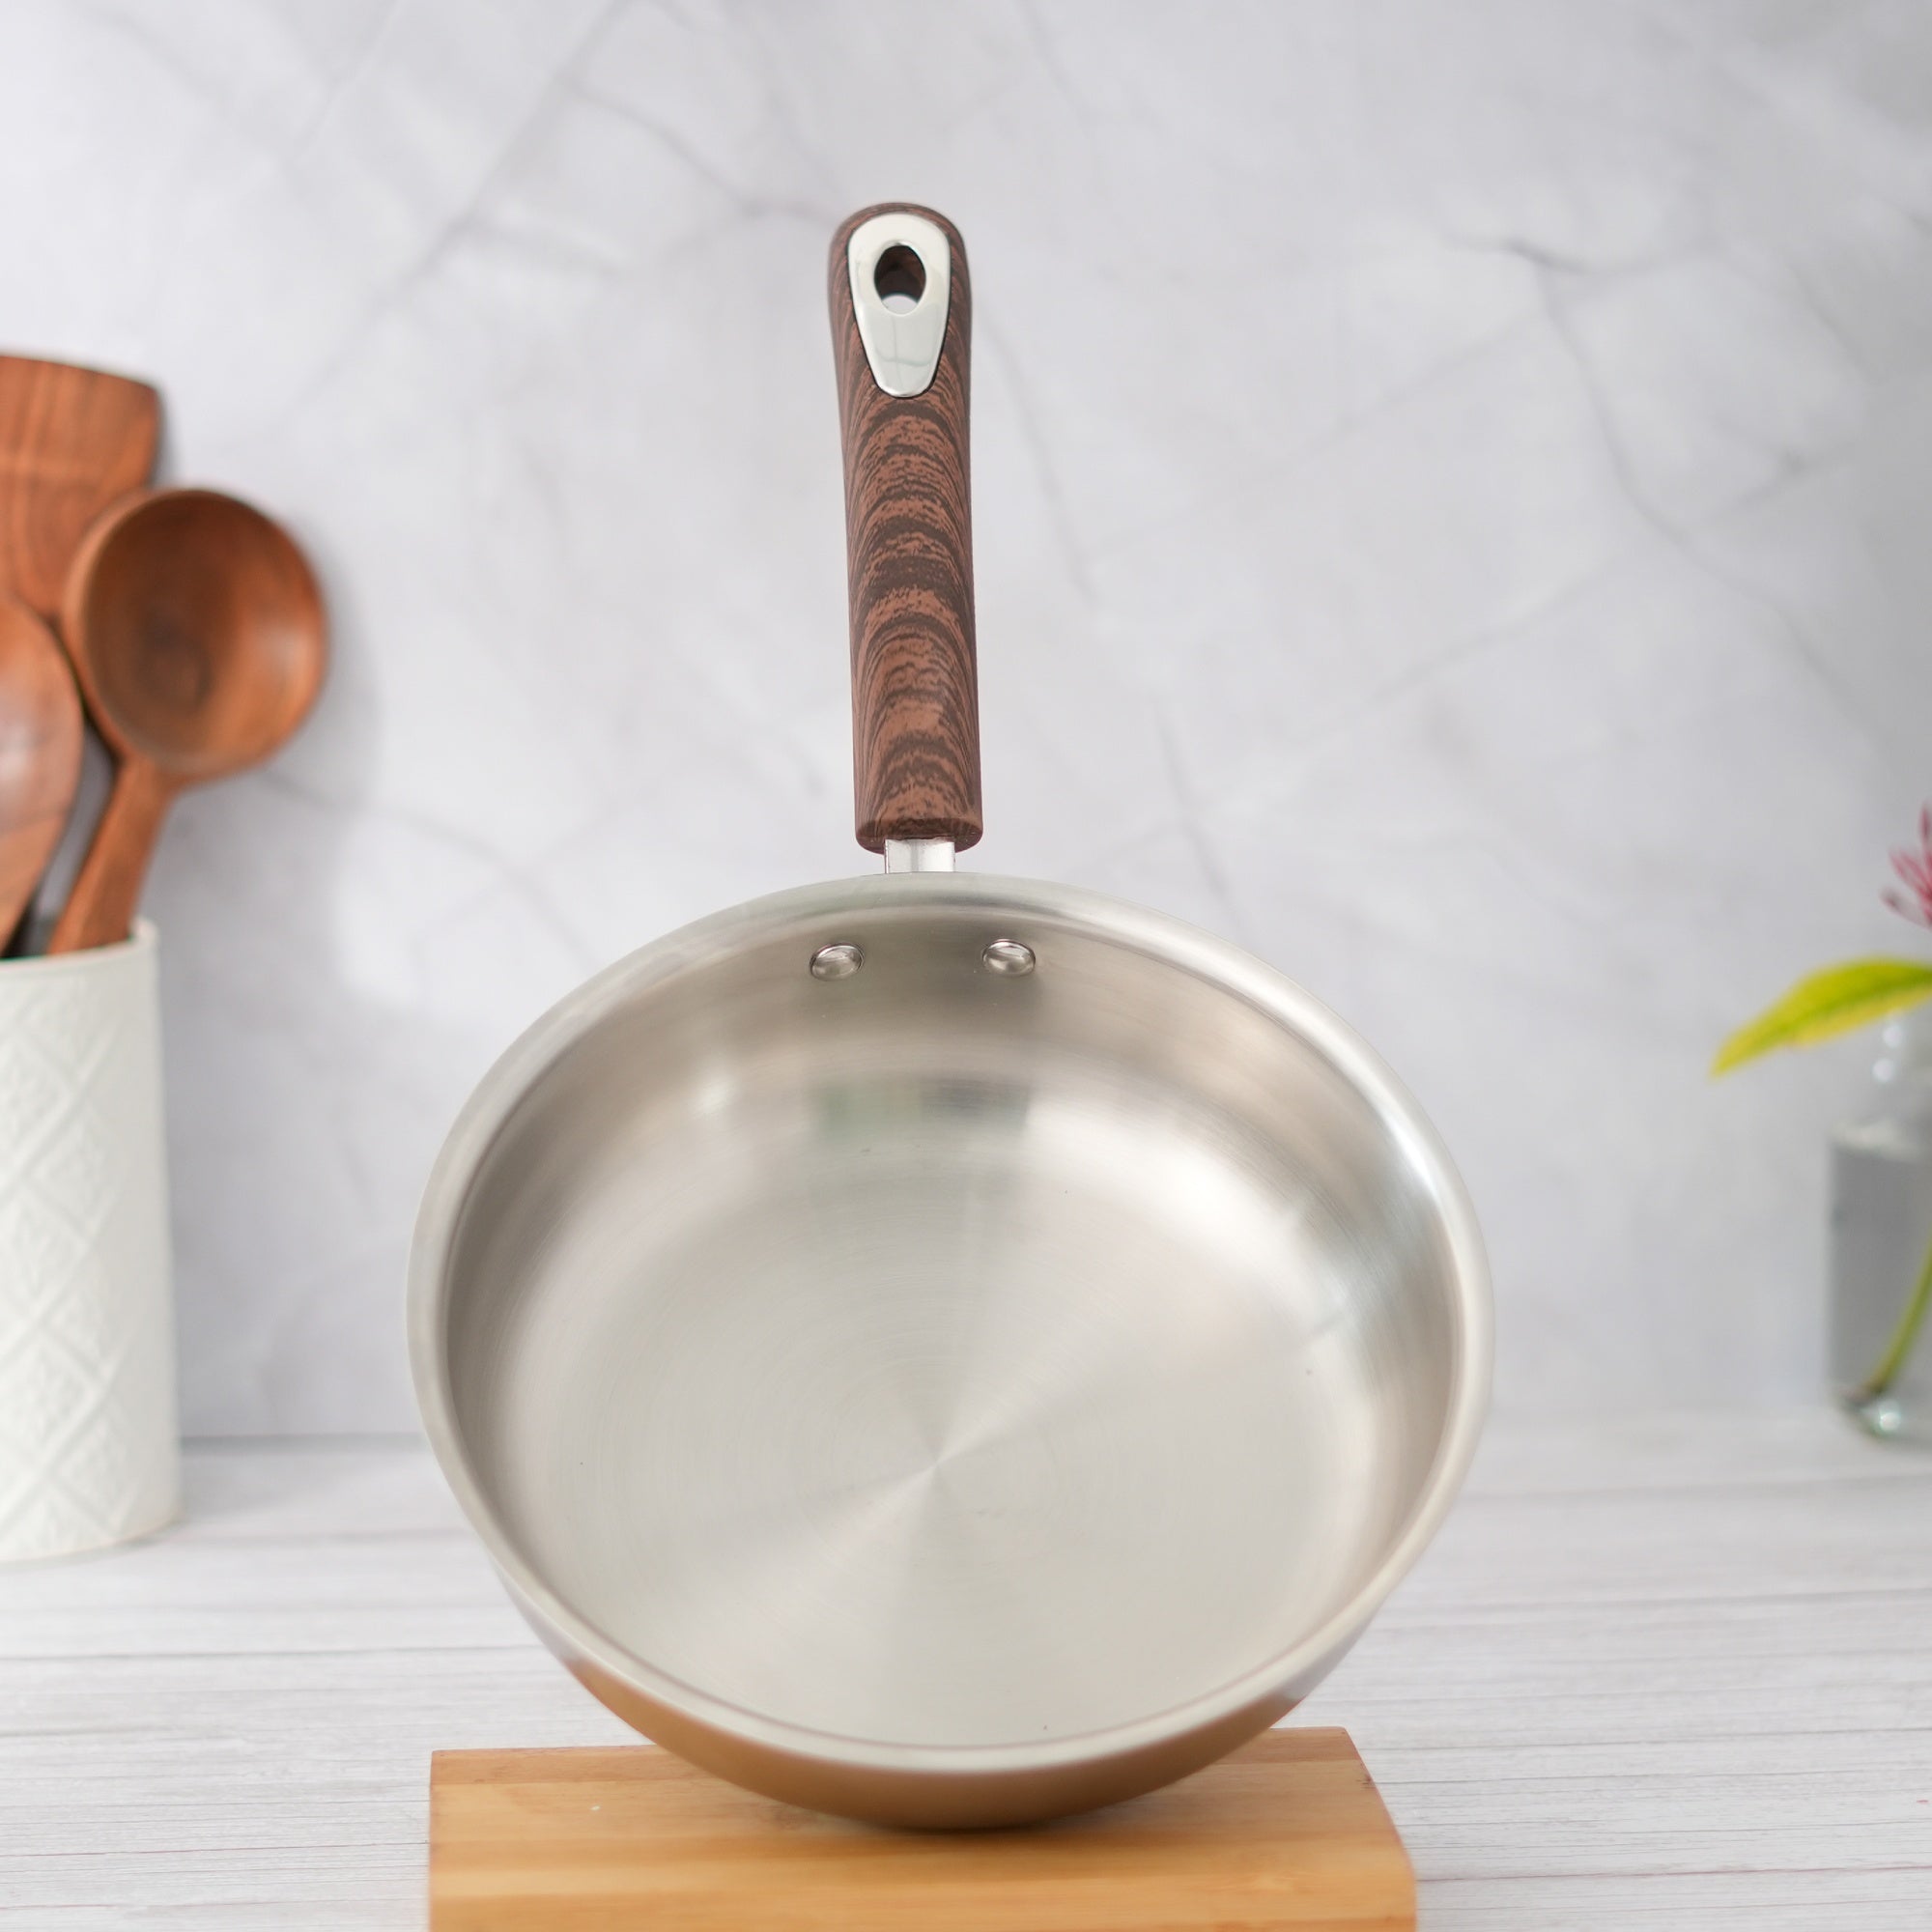 Femora Fry Pan, Bonded Tri-Ply Bottom with Smooth wooden Handle, Silver, Zero Coating, Health Safe